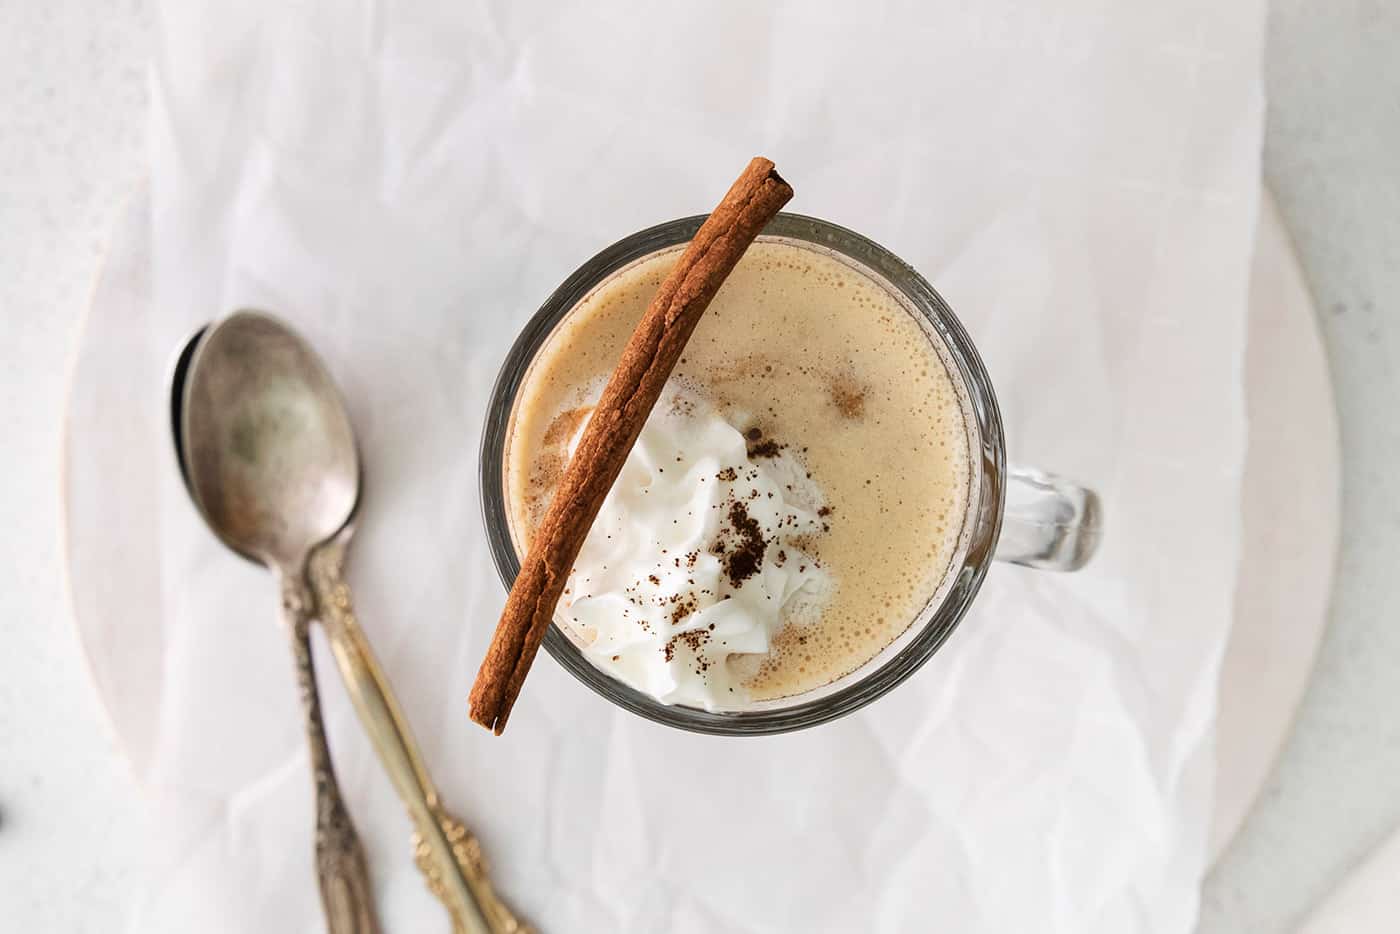 Overhead view of a hot buttered rum coffee with whipped cream and a cinnamon stick